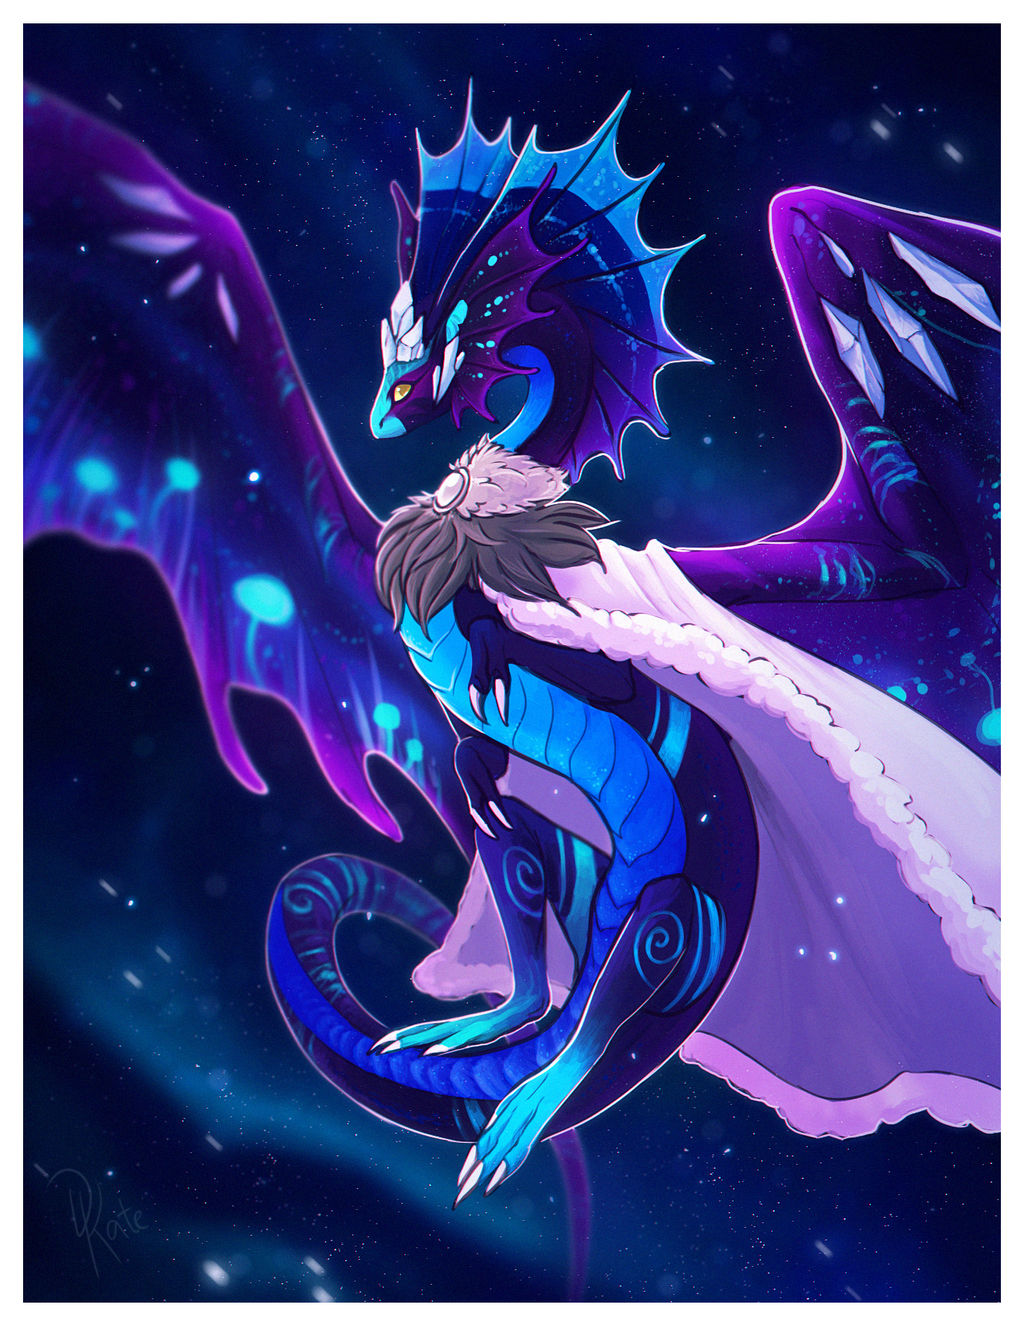 andromeda__commission__by_diokate_dc2y1oy-fullview.png